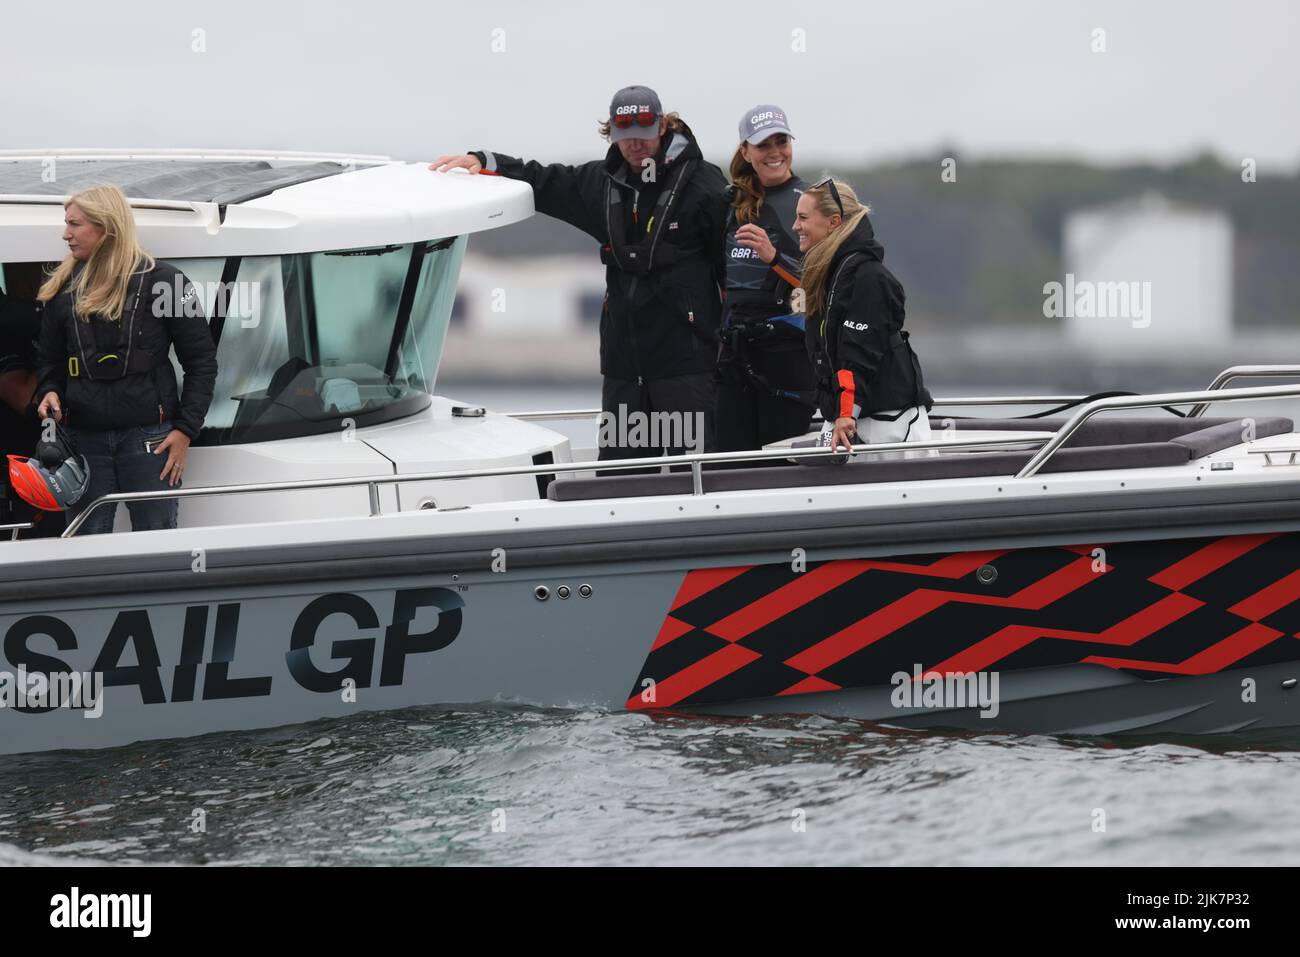 Plymouth, UK. 31st July, 2022. PHOTO:JEFF GILBERT 31st July 2022 Plymouth, Devon, UK THE DUCHESS OF CAMBRIDGE JOINS THE 1851 TRUST AND THE GREAT BRITAIN SAILGP TEAM IN PLYMOUTH. In Plymouth, Her Royal Highness will join a group of children taking part in the Protect Our Future programme by the 1851 Trust, the official charity of the Great Britain SailGP Team. Credit: Jeff Gilbert/Alamy Live News Stock Photo